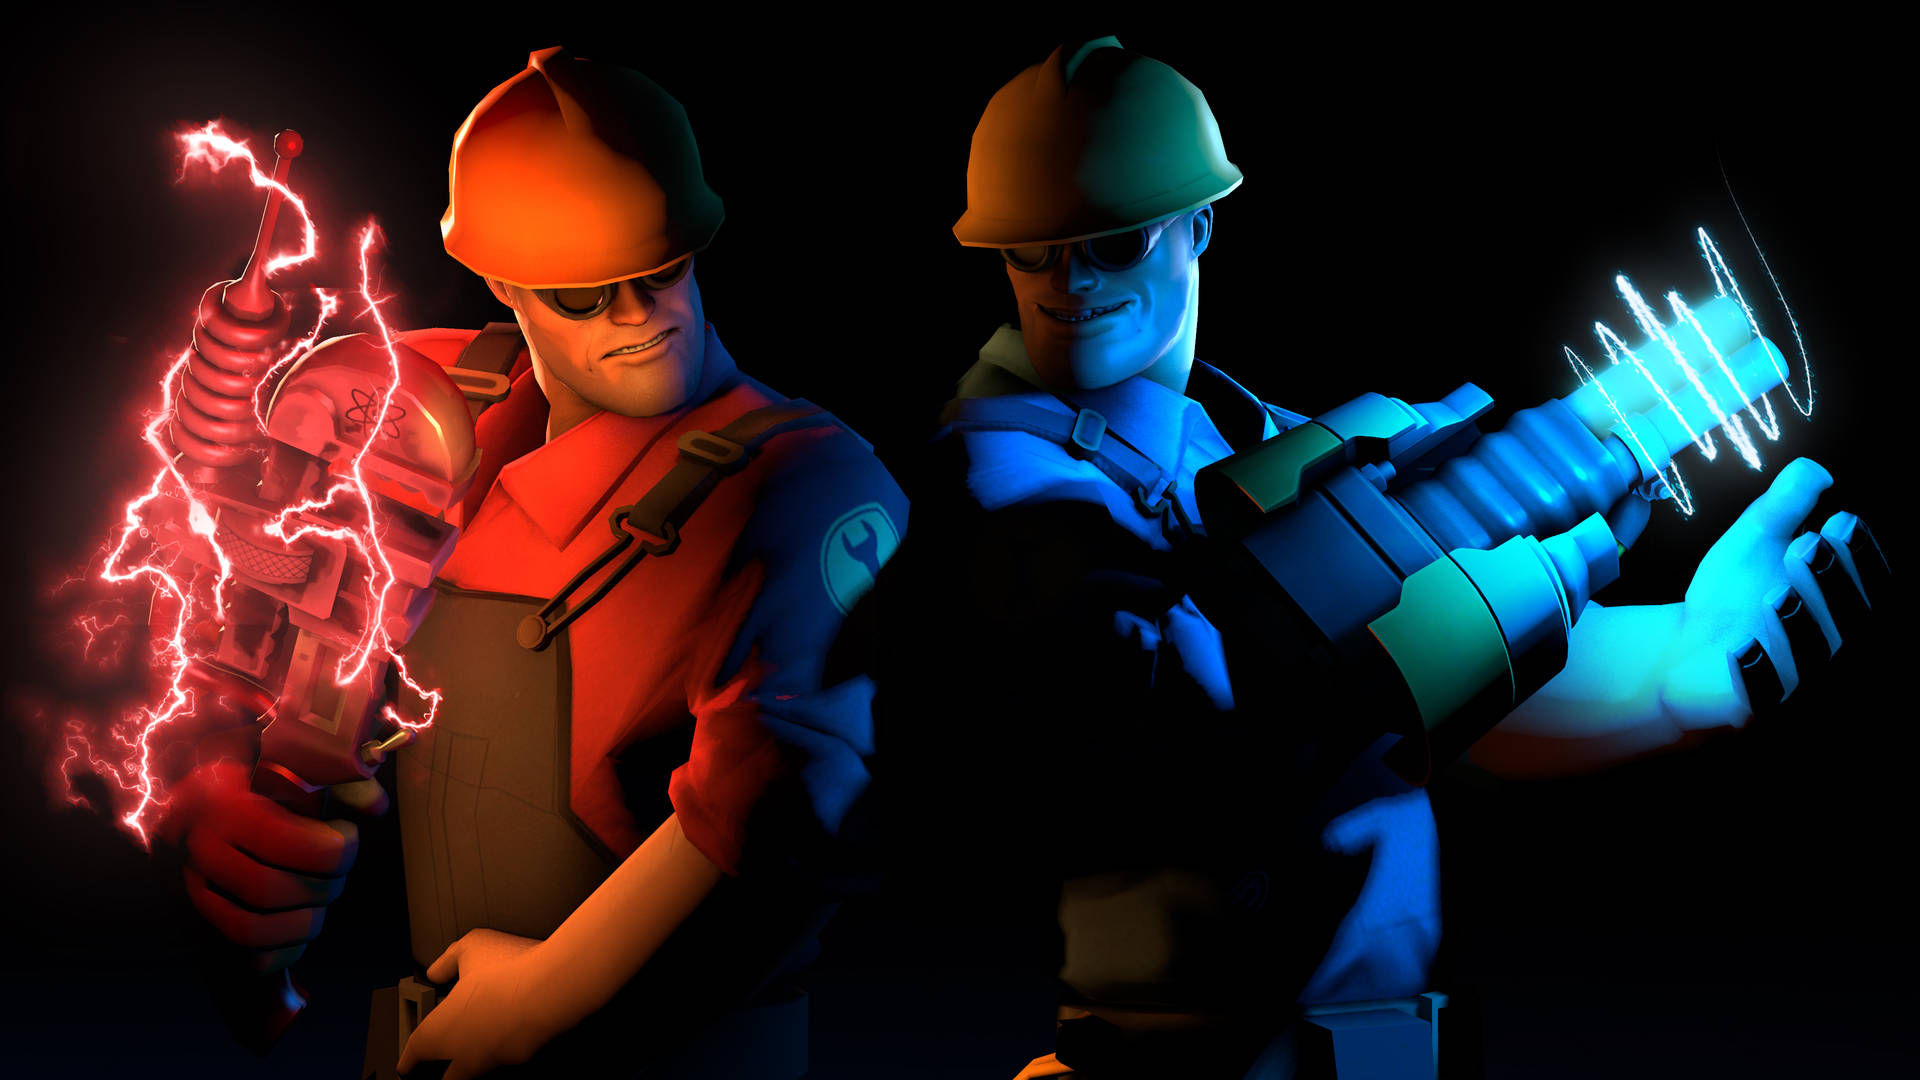 Tf2 4k Engineer Blue And Red